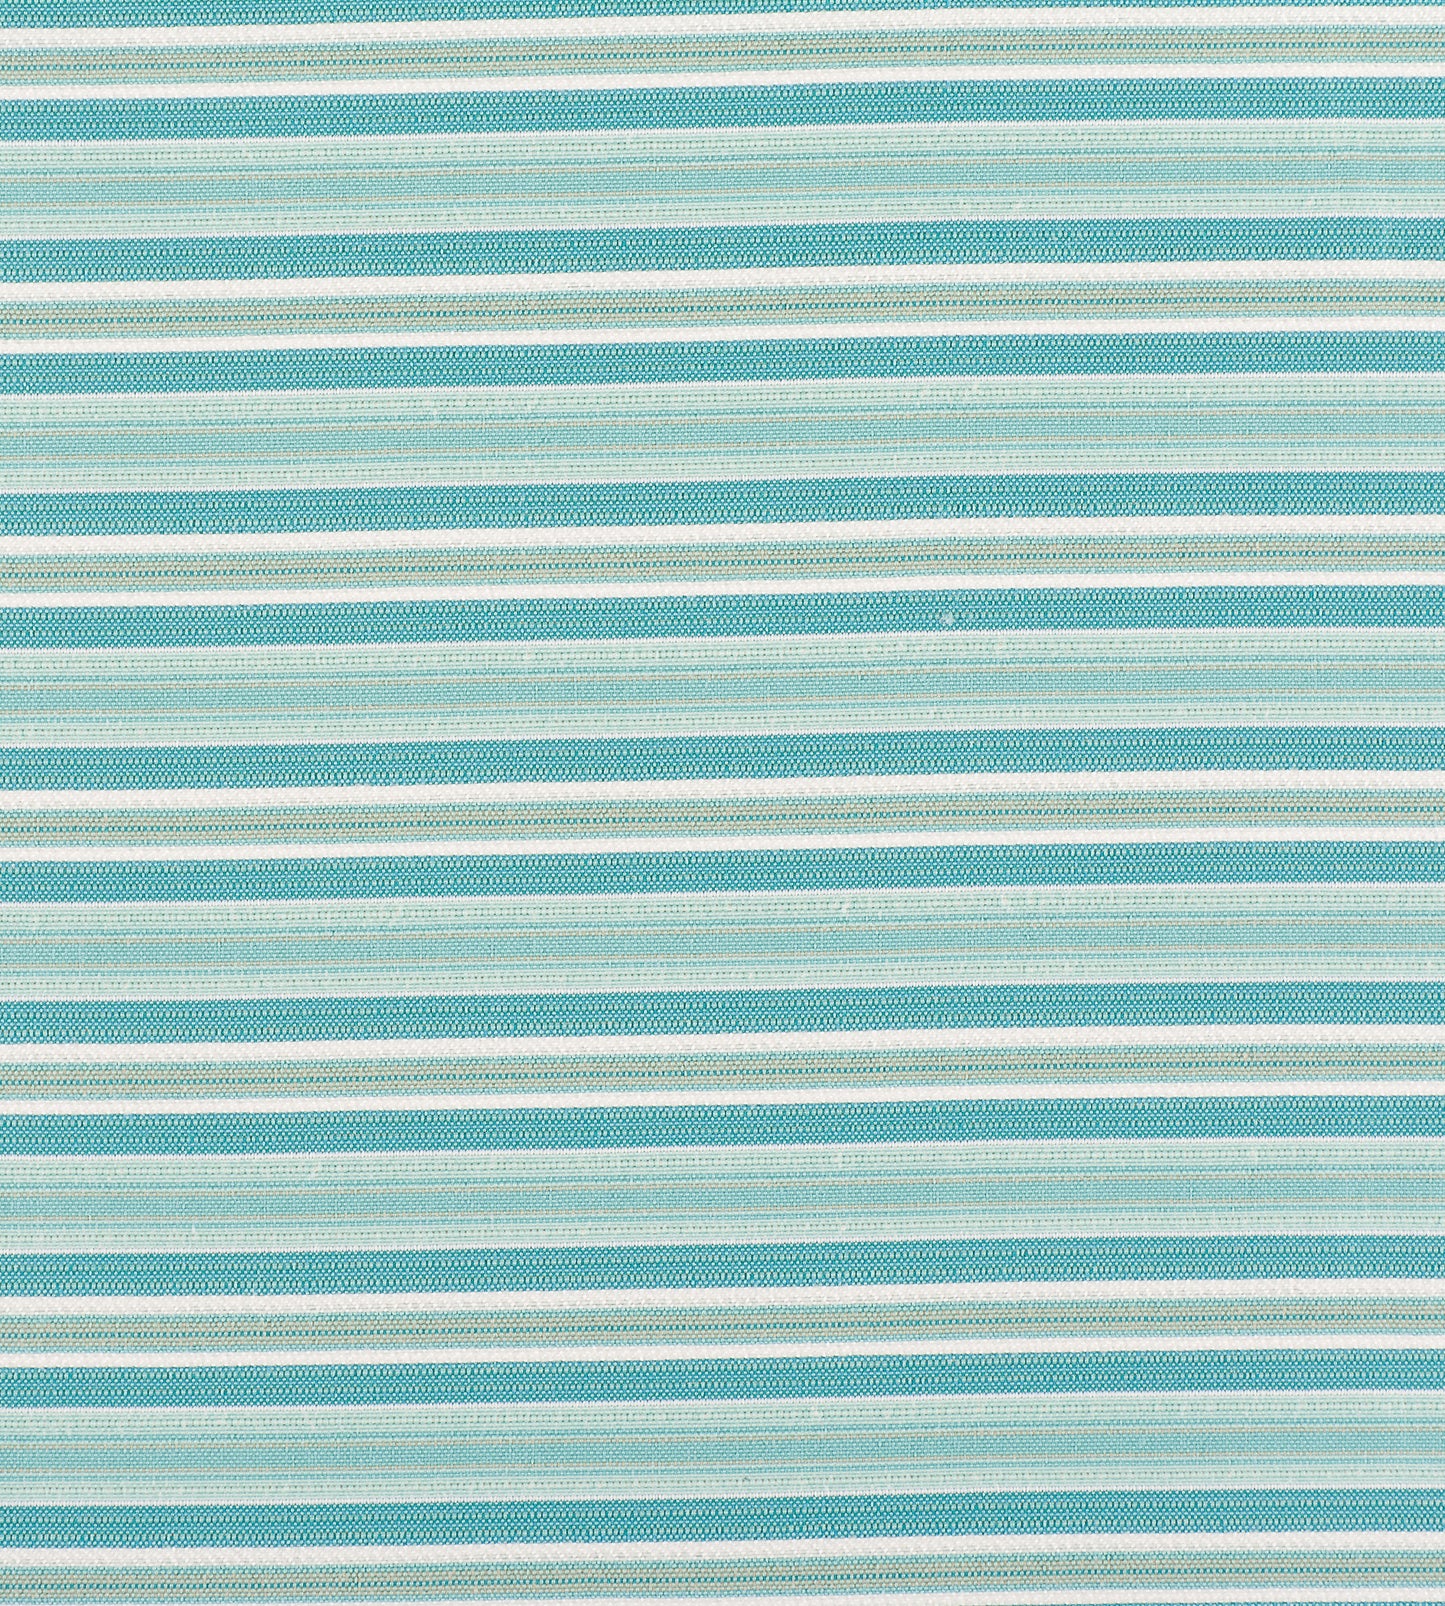 Purchase Old World Weavers Fabric SKU# WR 00022661, Steps Beach Turquoise 2